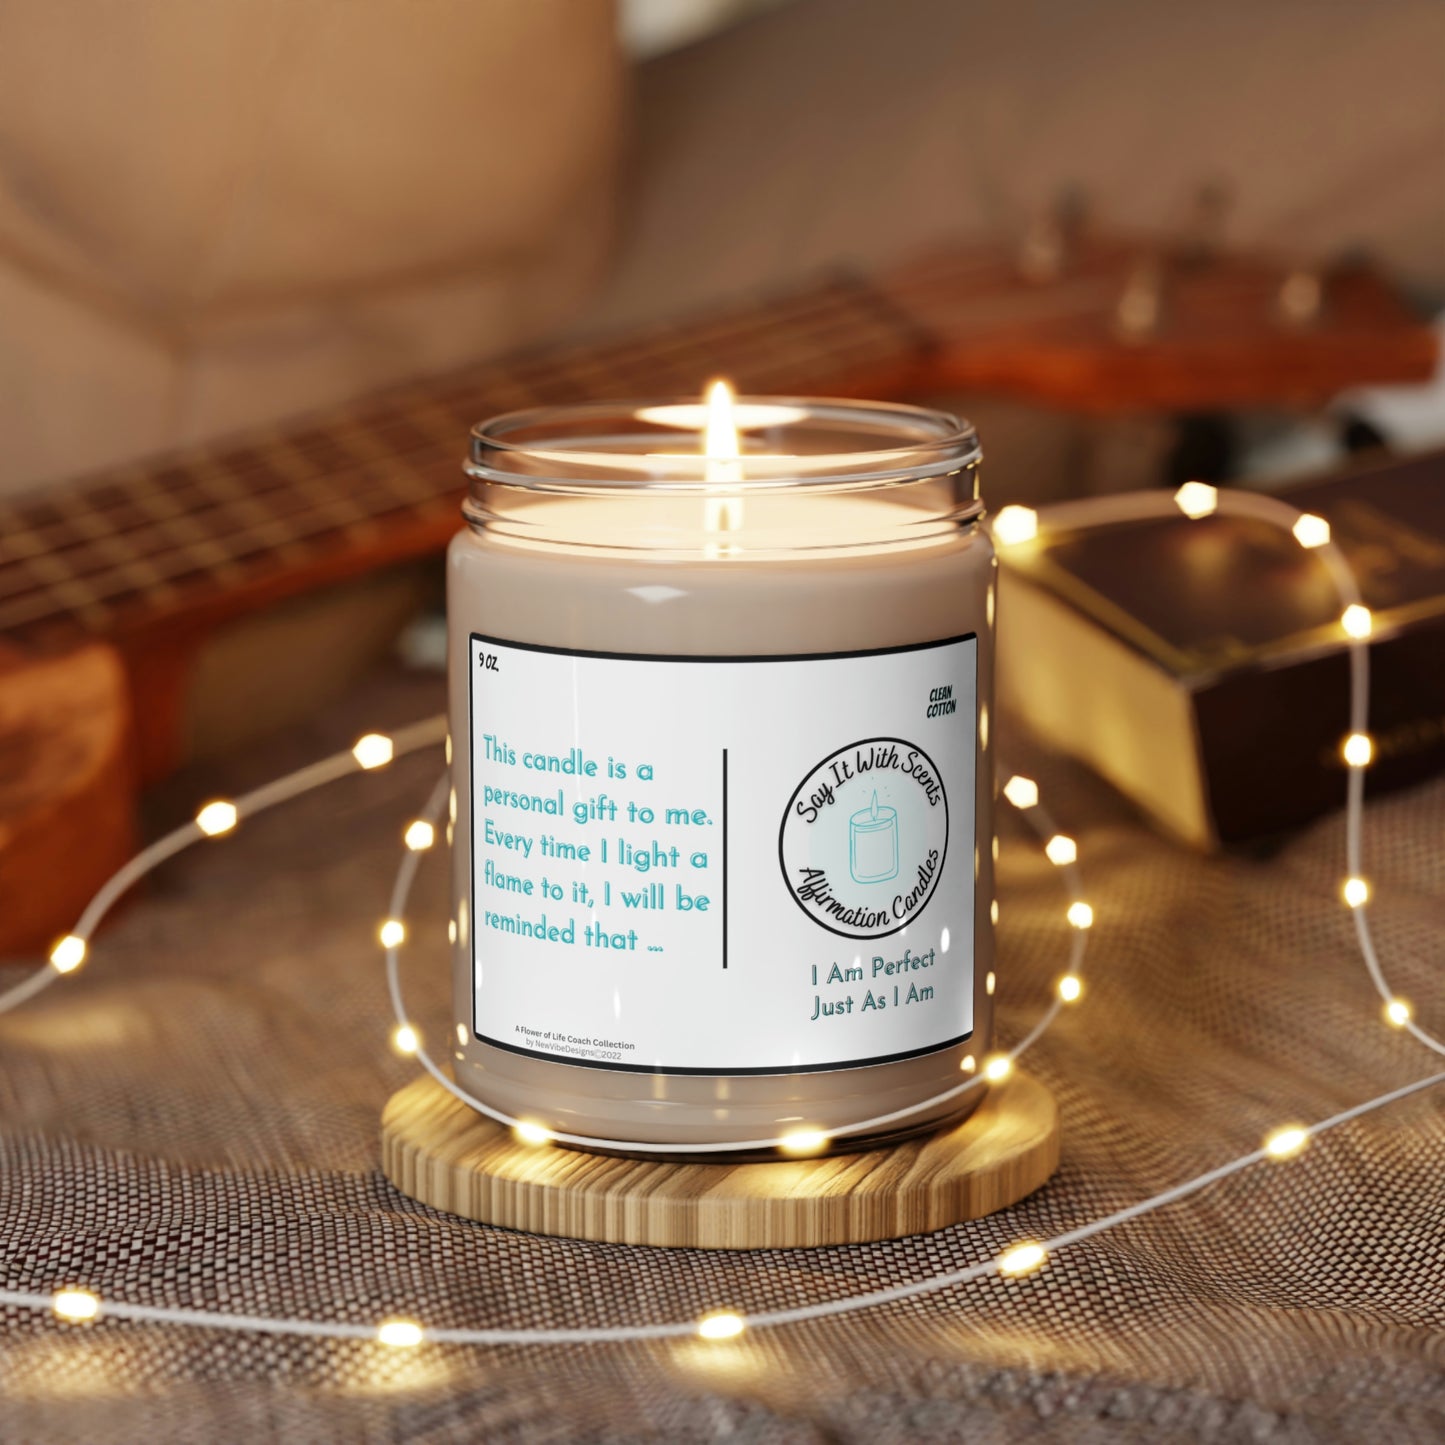 Decorative Aromatherapy Bedroom Livingroom Say It With Scents Affirmation Scented Soy Candle, 9oz